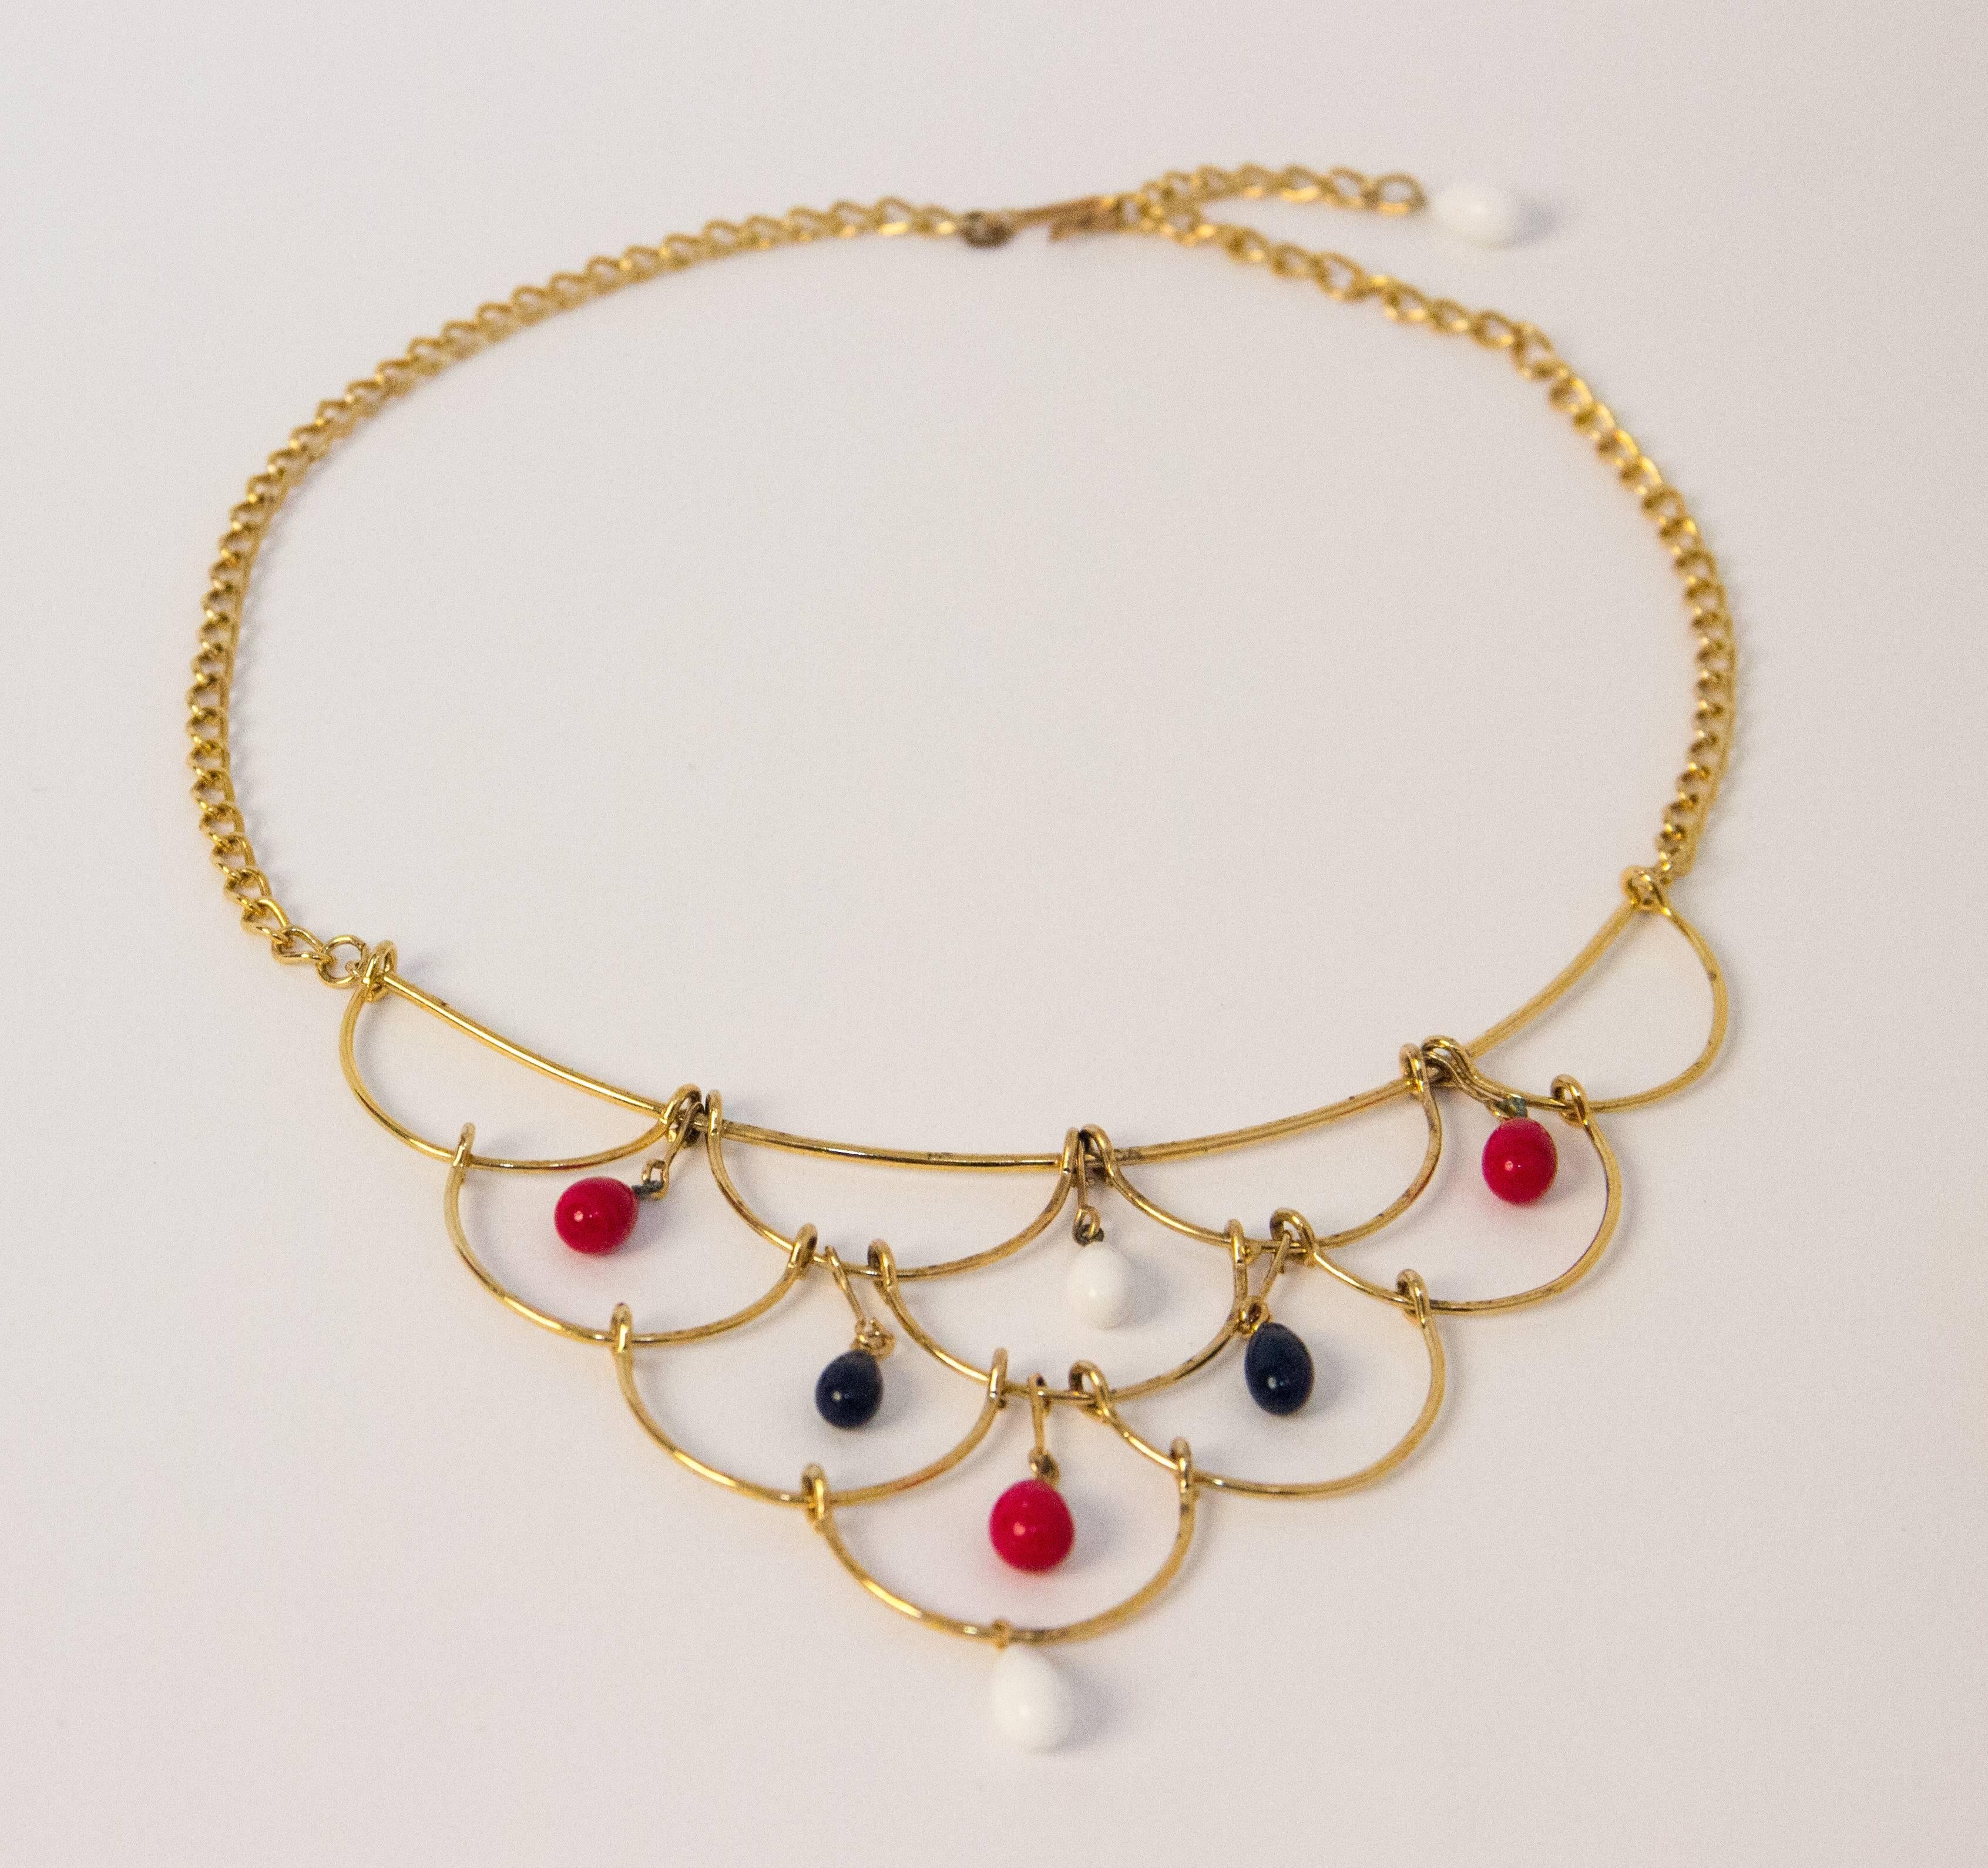 60s gold toned necklace and earring set with red, white and blue glass bead embellishments. Hook clasp on necklace. Clip on earrings.

Measurements:

Necklace: (chain is 6 1/4 inches long on each side = 12 1/2 total excluding plate) (Plate is